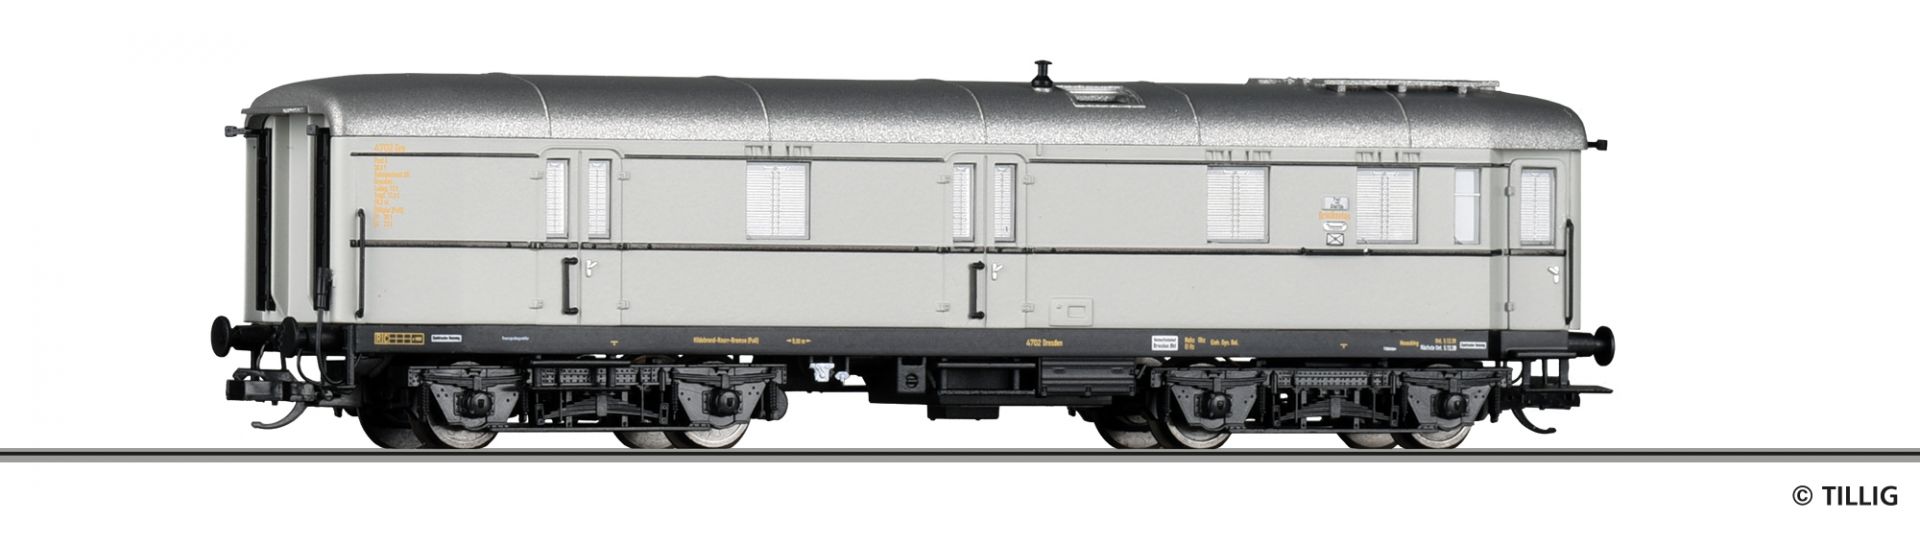 502171 | Mail waggon DRG -sold out-